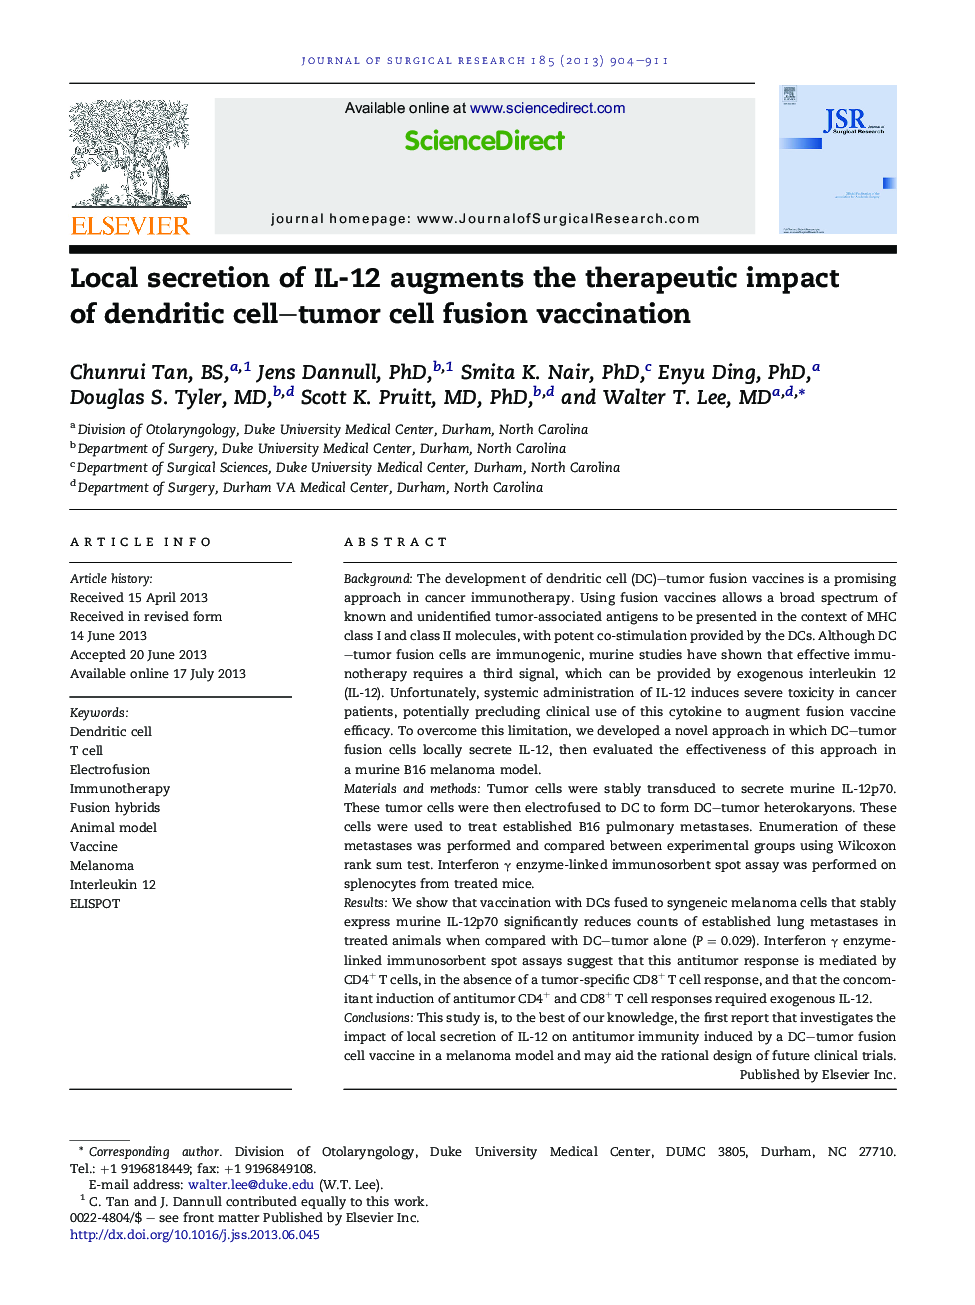 Local secretion of IL-12 augments the therapeutic impact of dendritic cell–tumor cell fusion vaccination